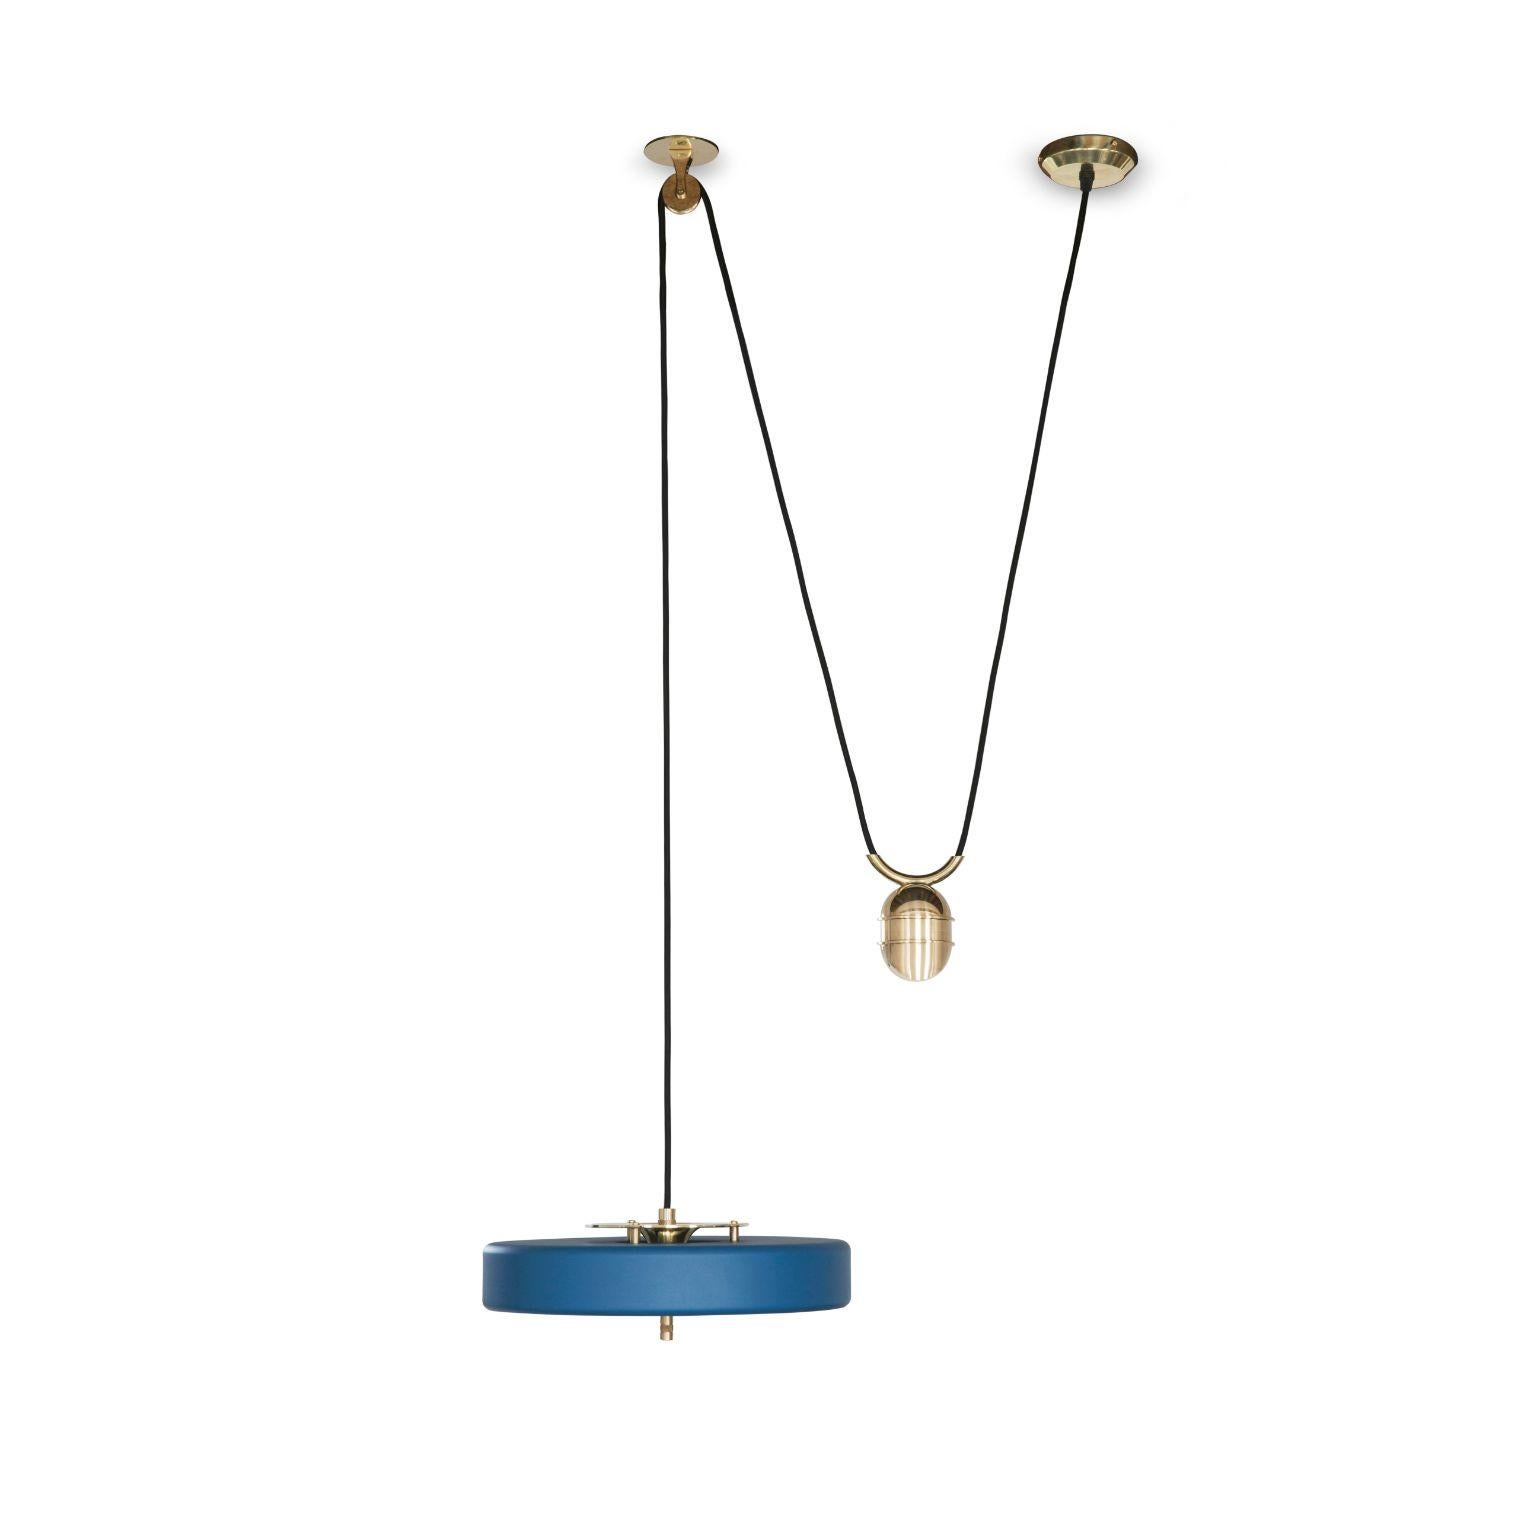 Revolve Rise and fall pendant light - Polished brass - Blue by Bert Frank
Dimensions: 30 x 35 x 11 cm, small lamp: 7.6 cm
Materials: Brass, steel

Also Available in brushed brass
When Adam Yeats and Robbie Llewellyn founded Bert Frank in 2013 it was